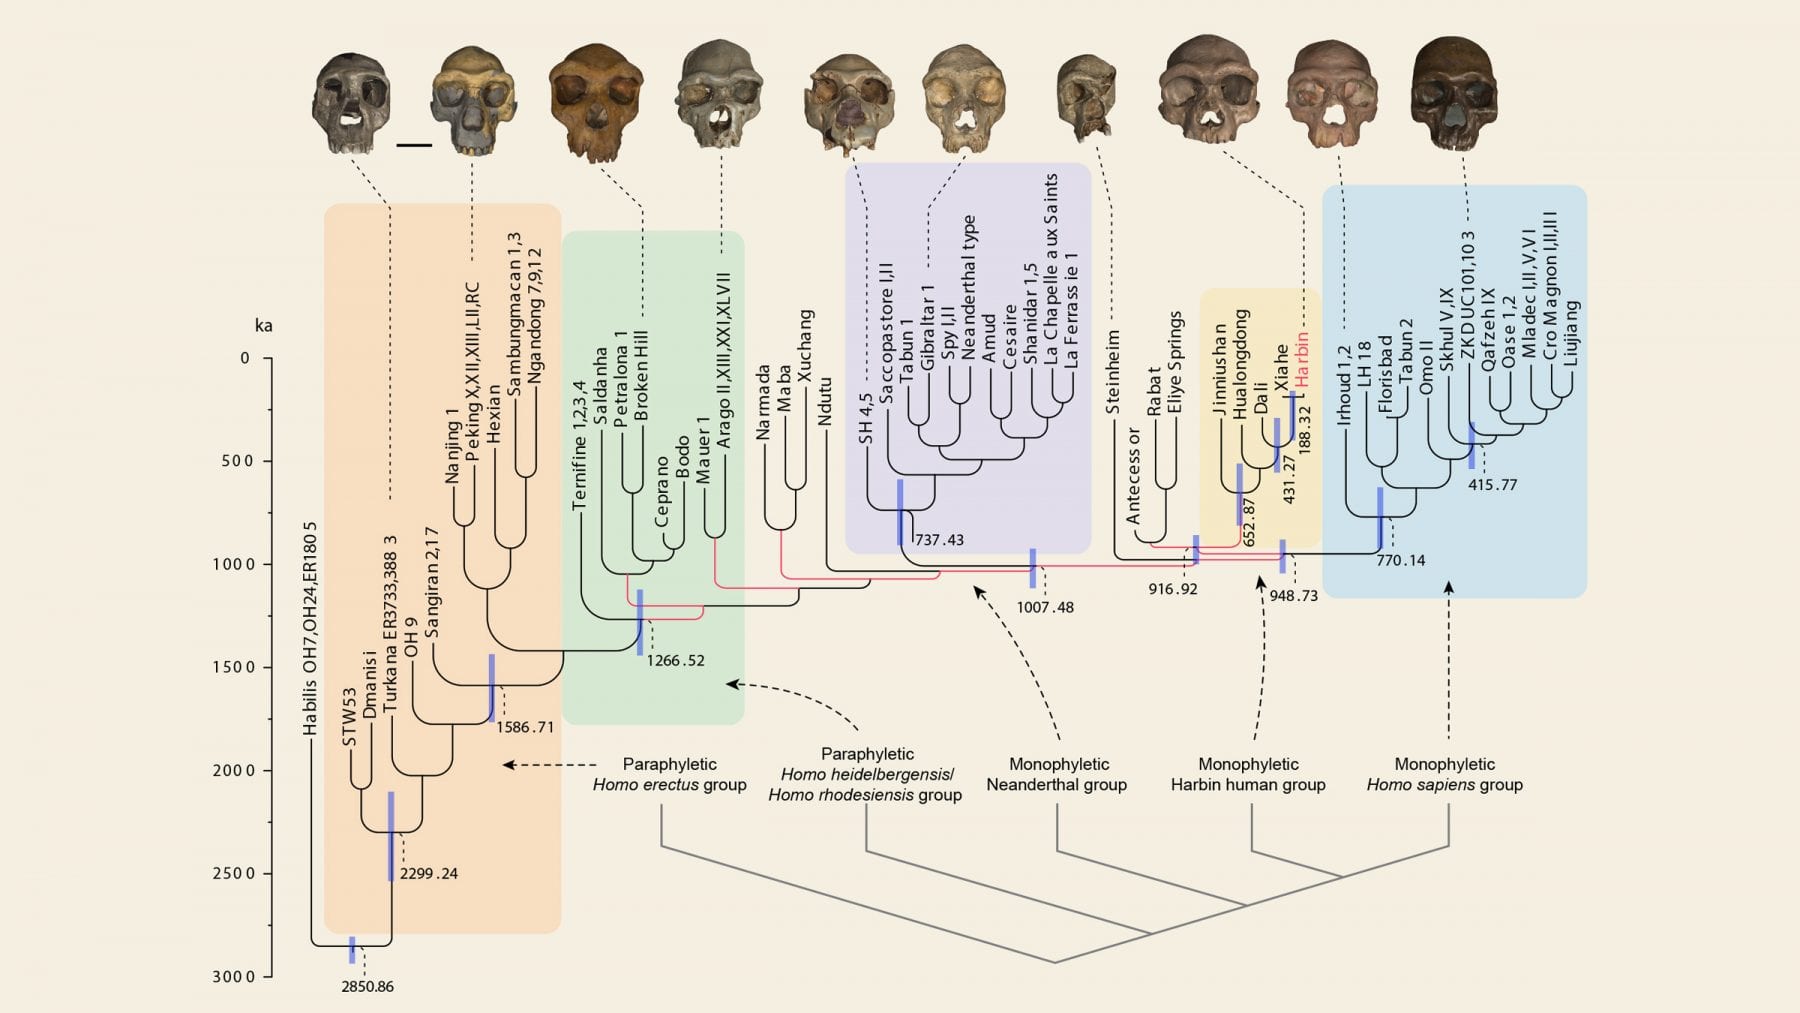 Latest version of the human family tree including the skull of the Dragon Man from the city of Harbin. Credit: Ni et al. 